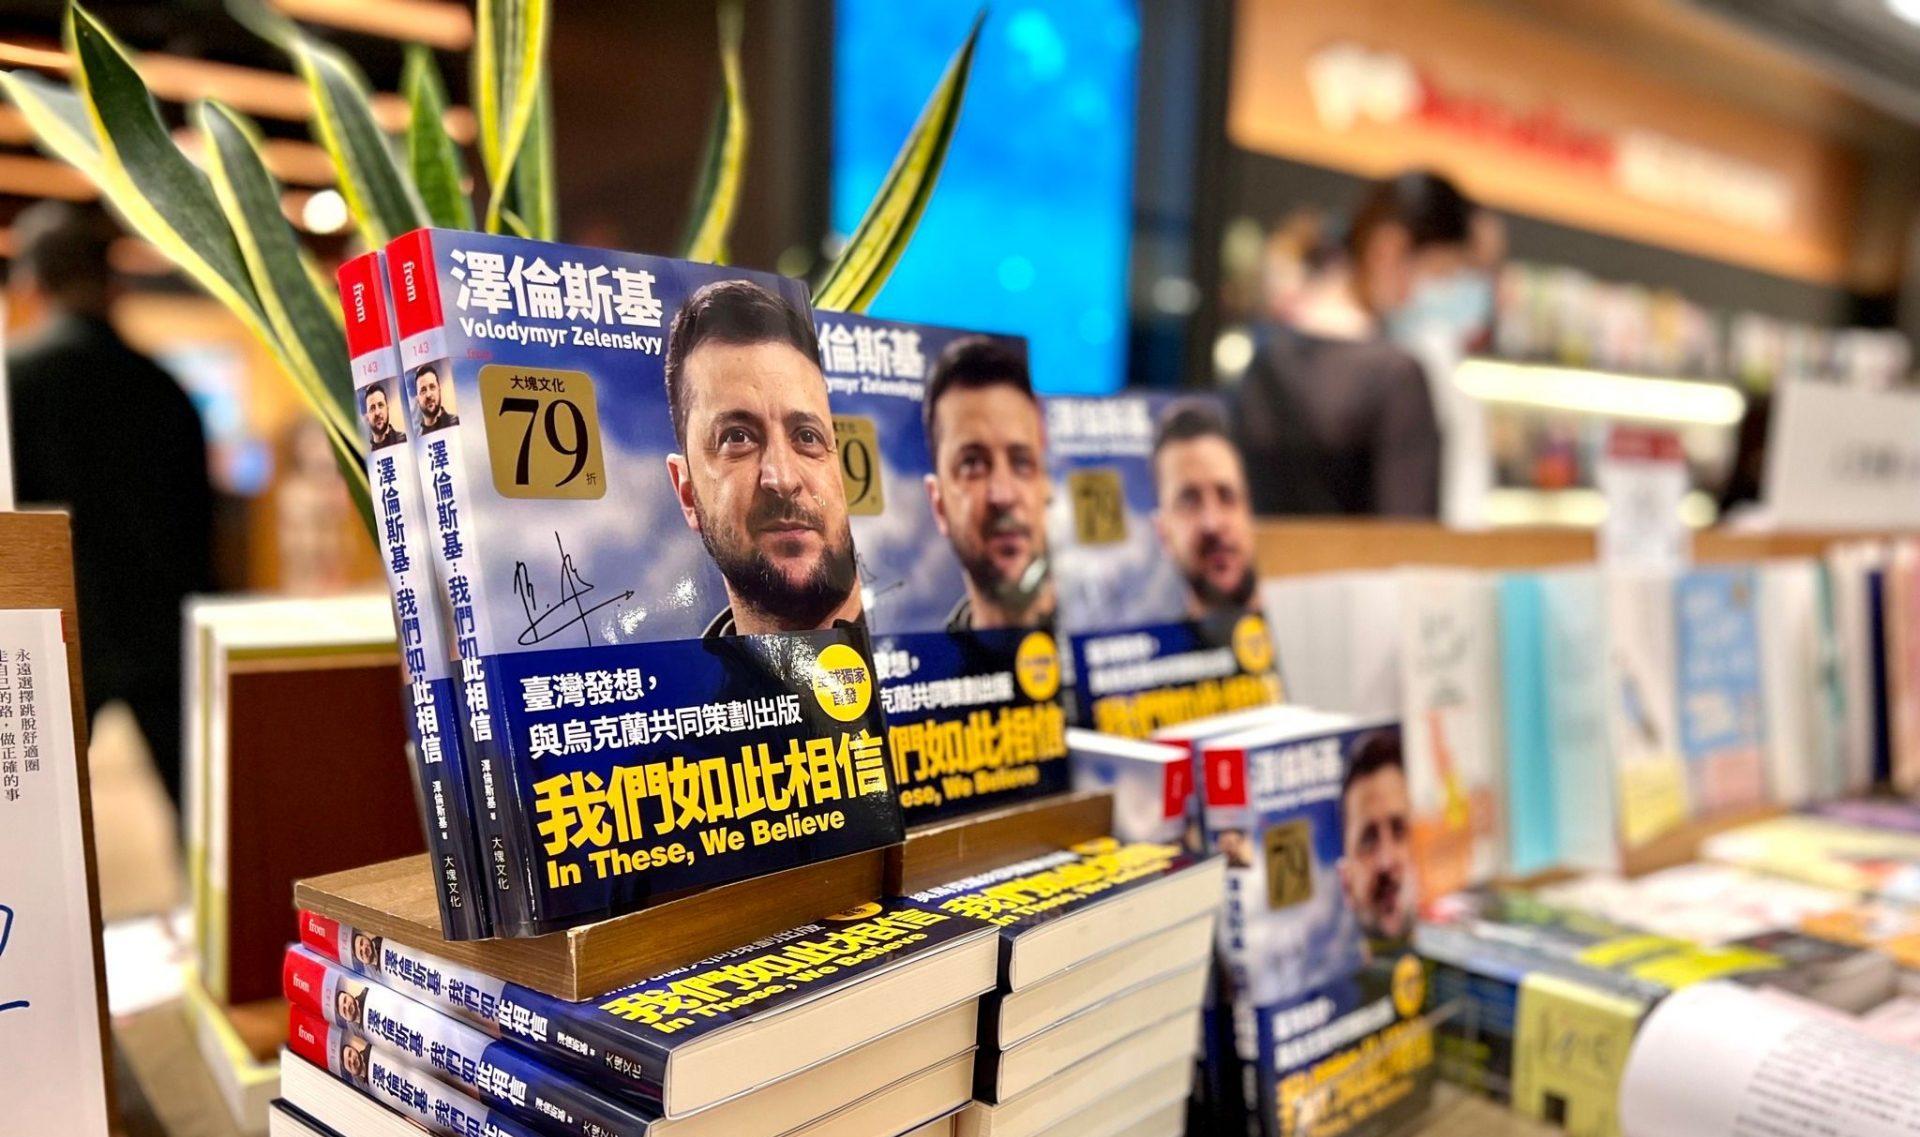 A book with Zelensky's speeches was published in Taiwan